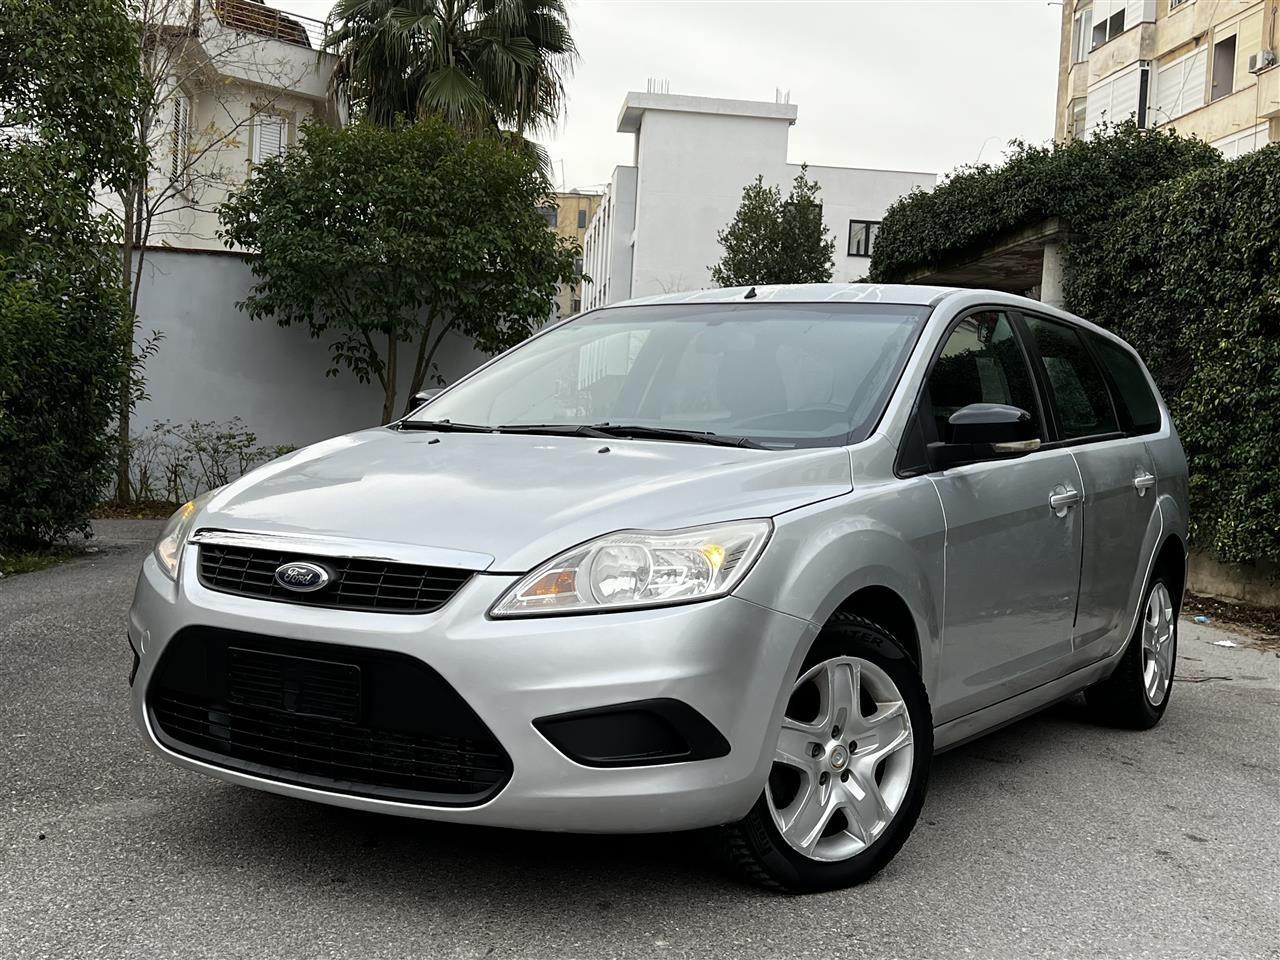 Ford focus 1.6 nafte 2010 